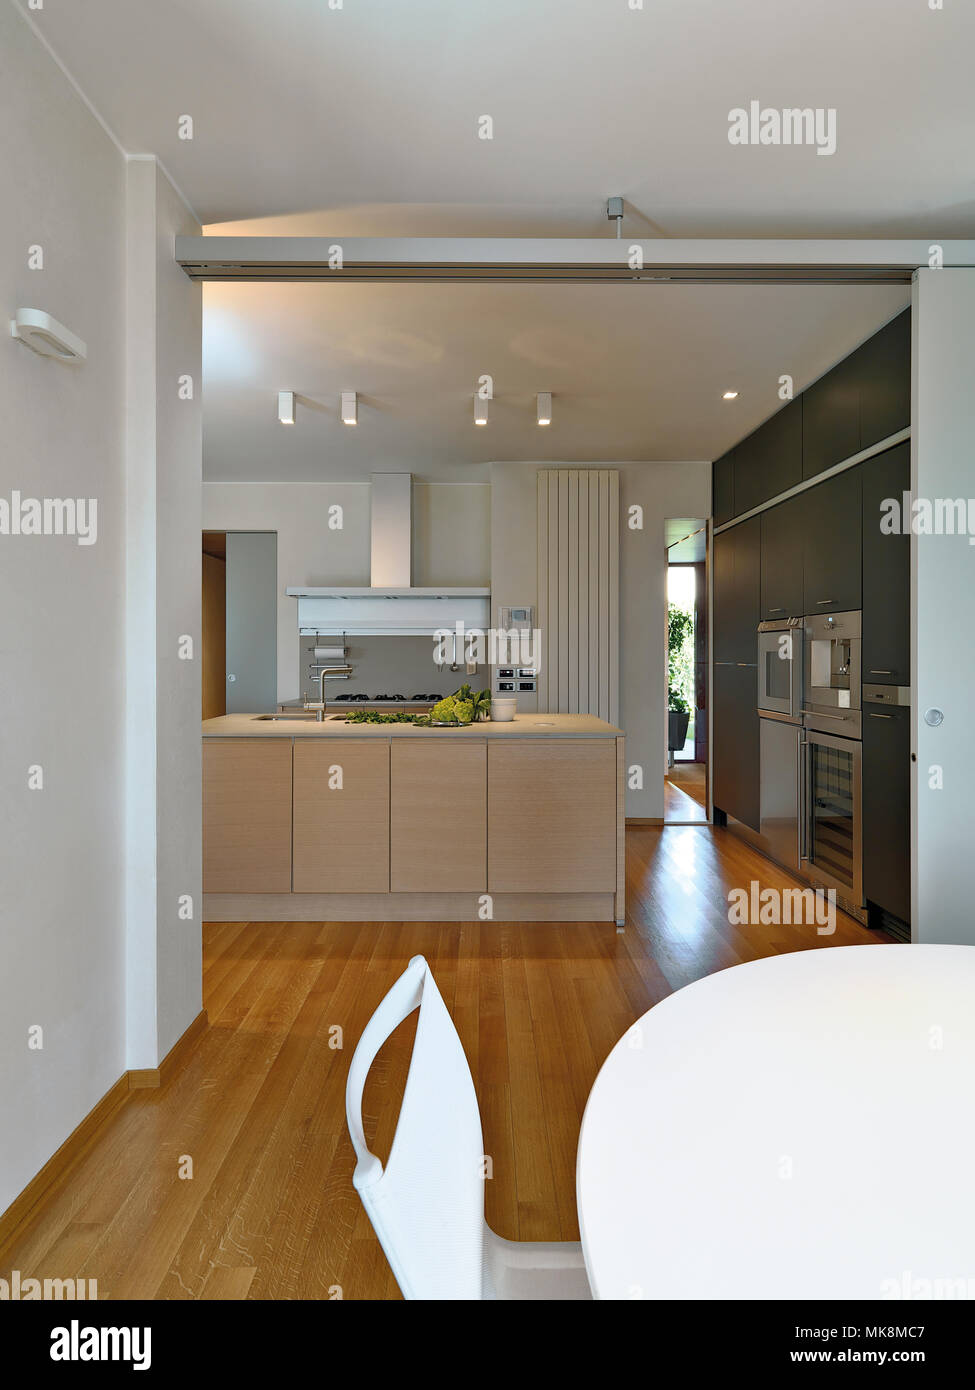 interiors shots of a modern kitchen with kitchen isanad in the foreground the white dining table the floor is made of wood Stock Photo